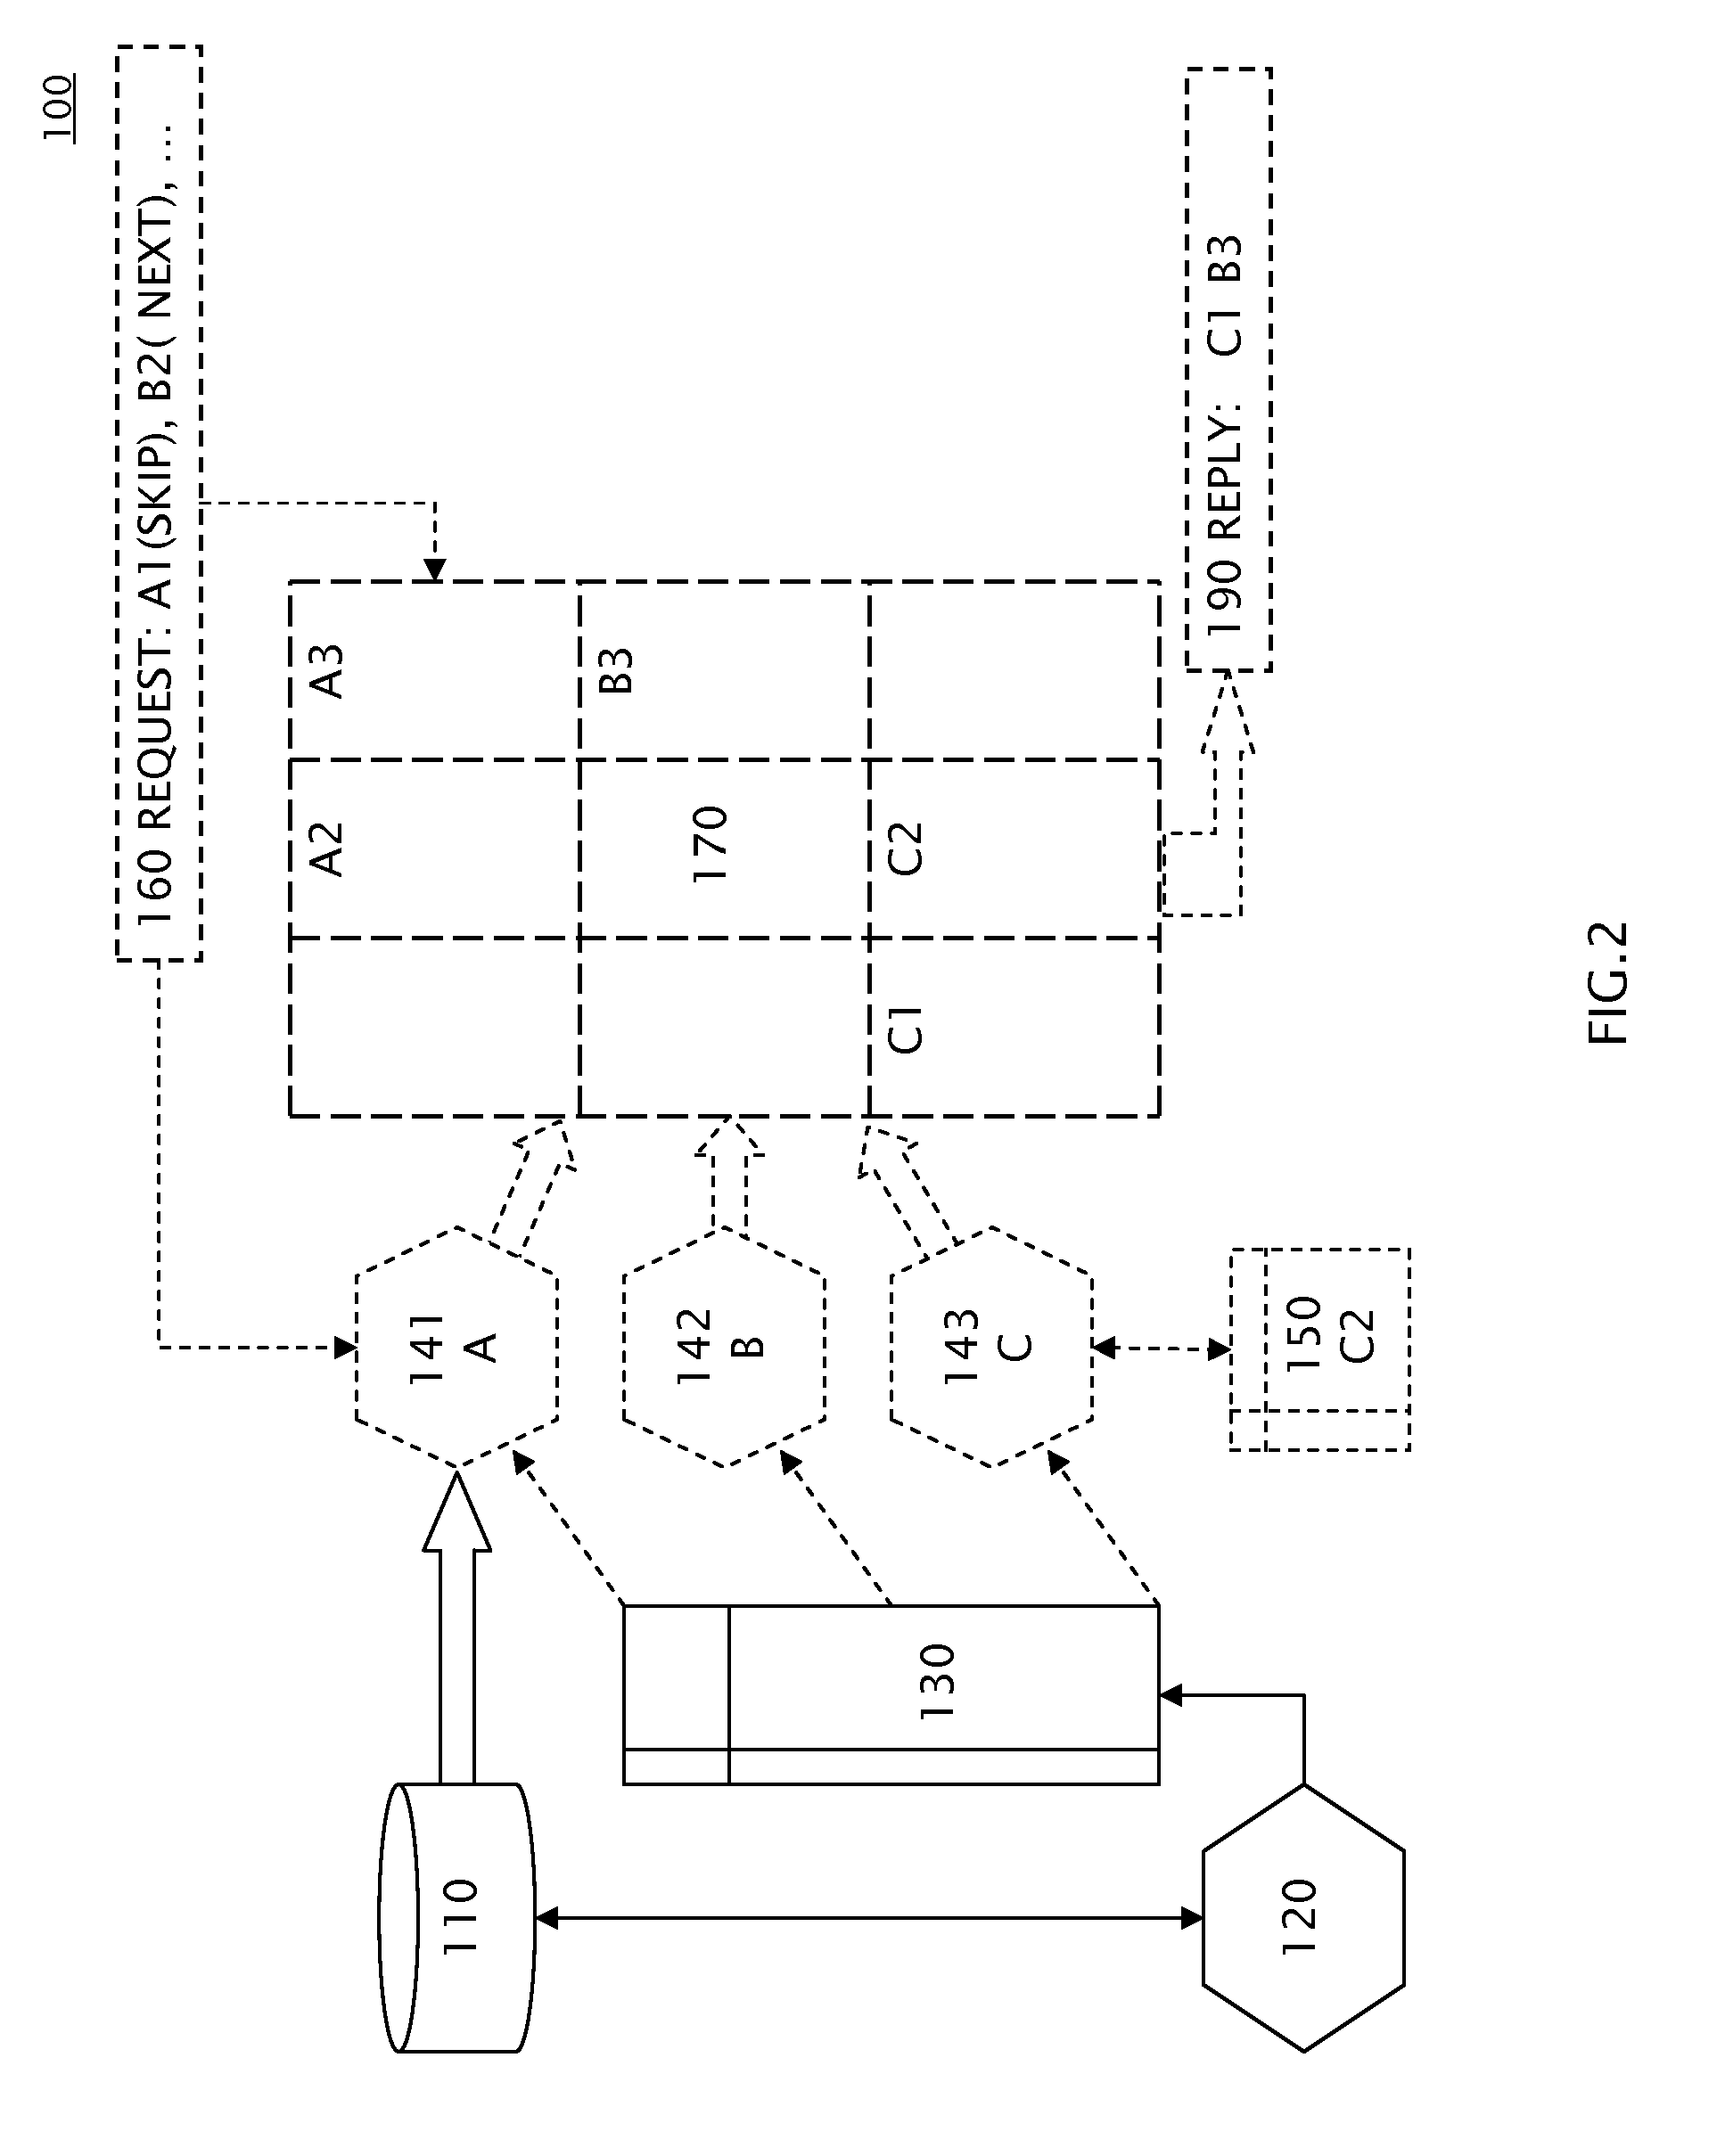 Hierarchical skipping method for optimizing data transfer through retrieval and identification of non-redundant components